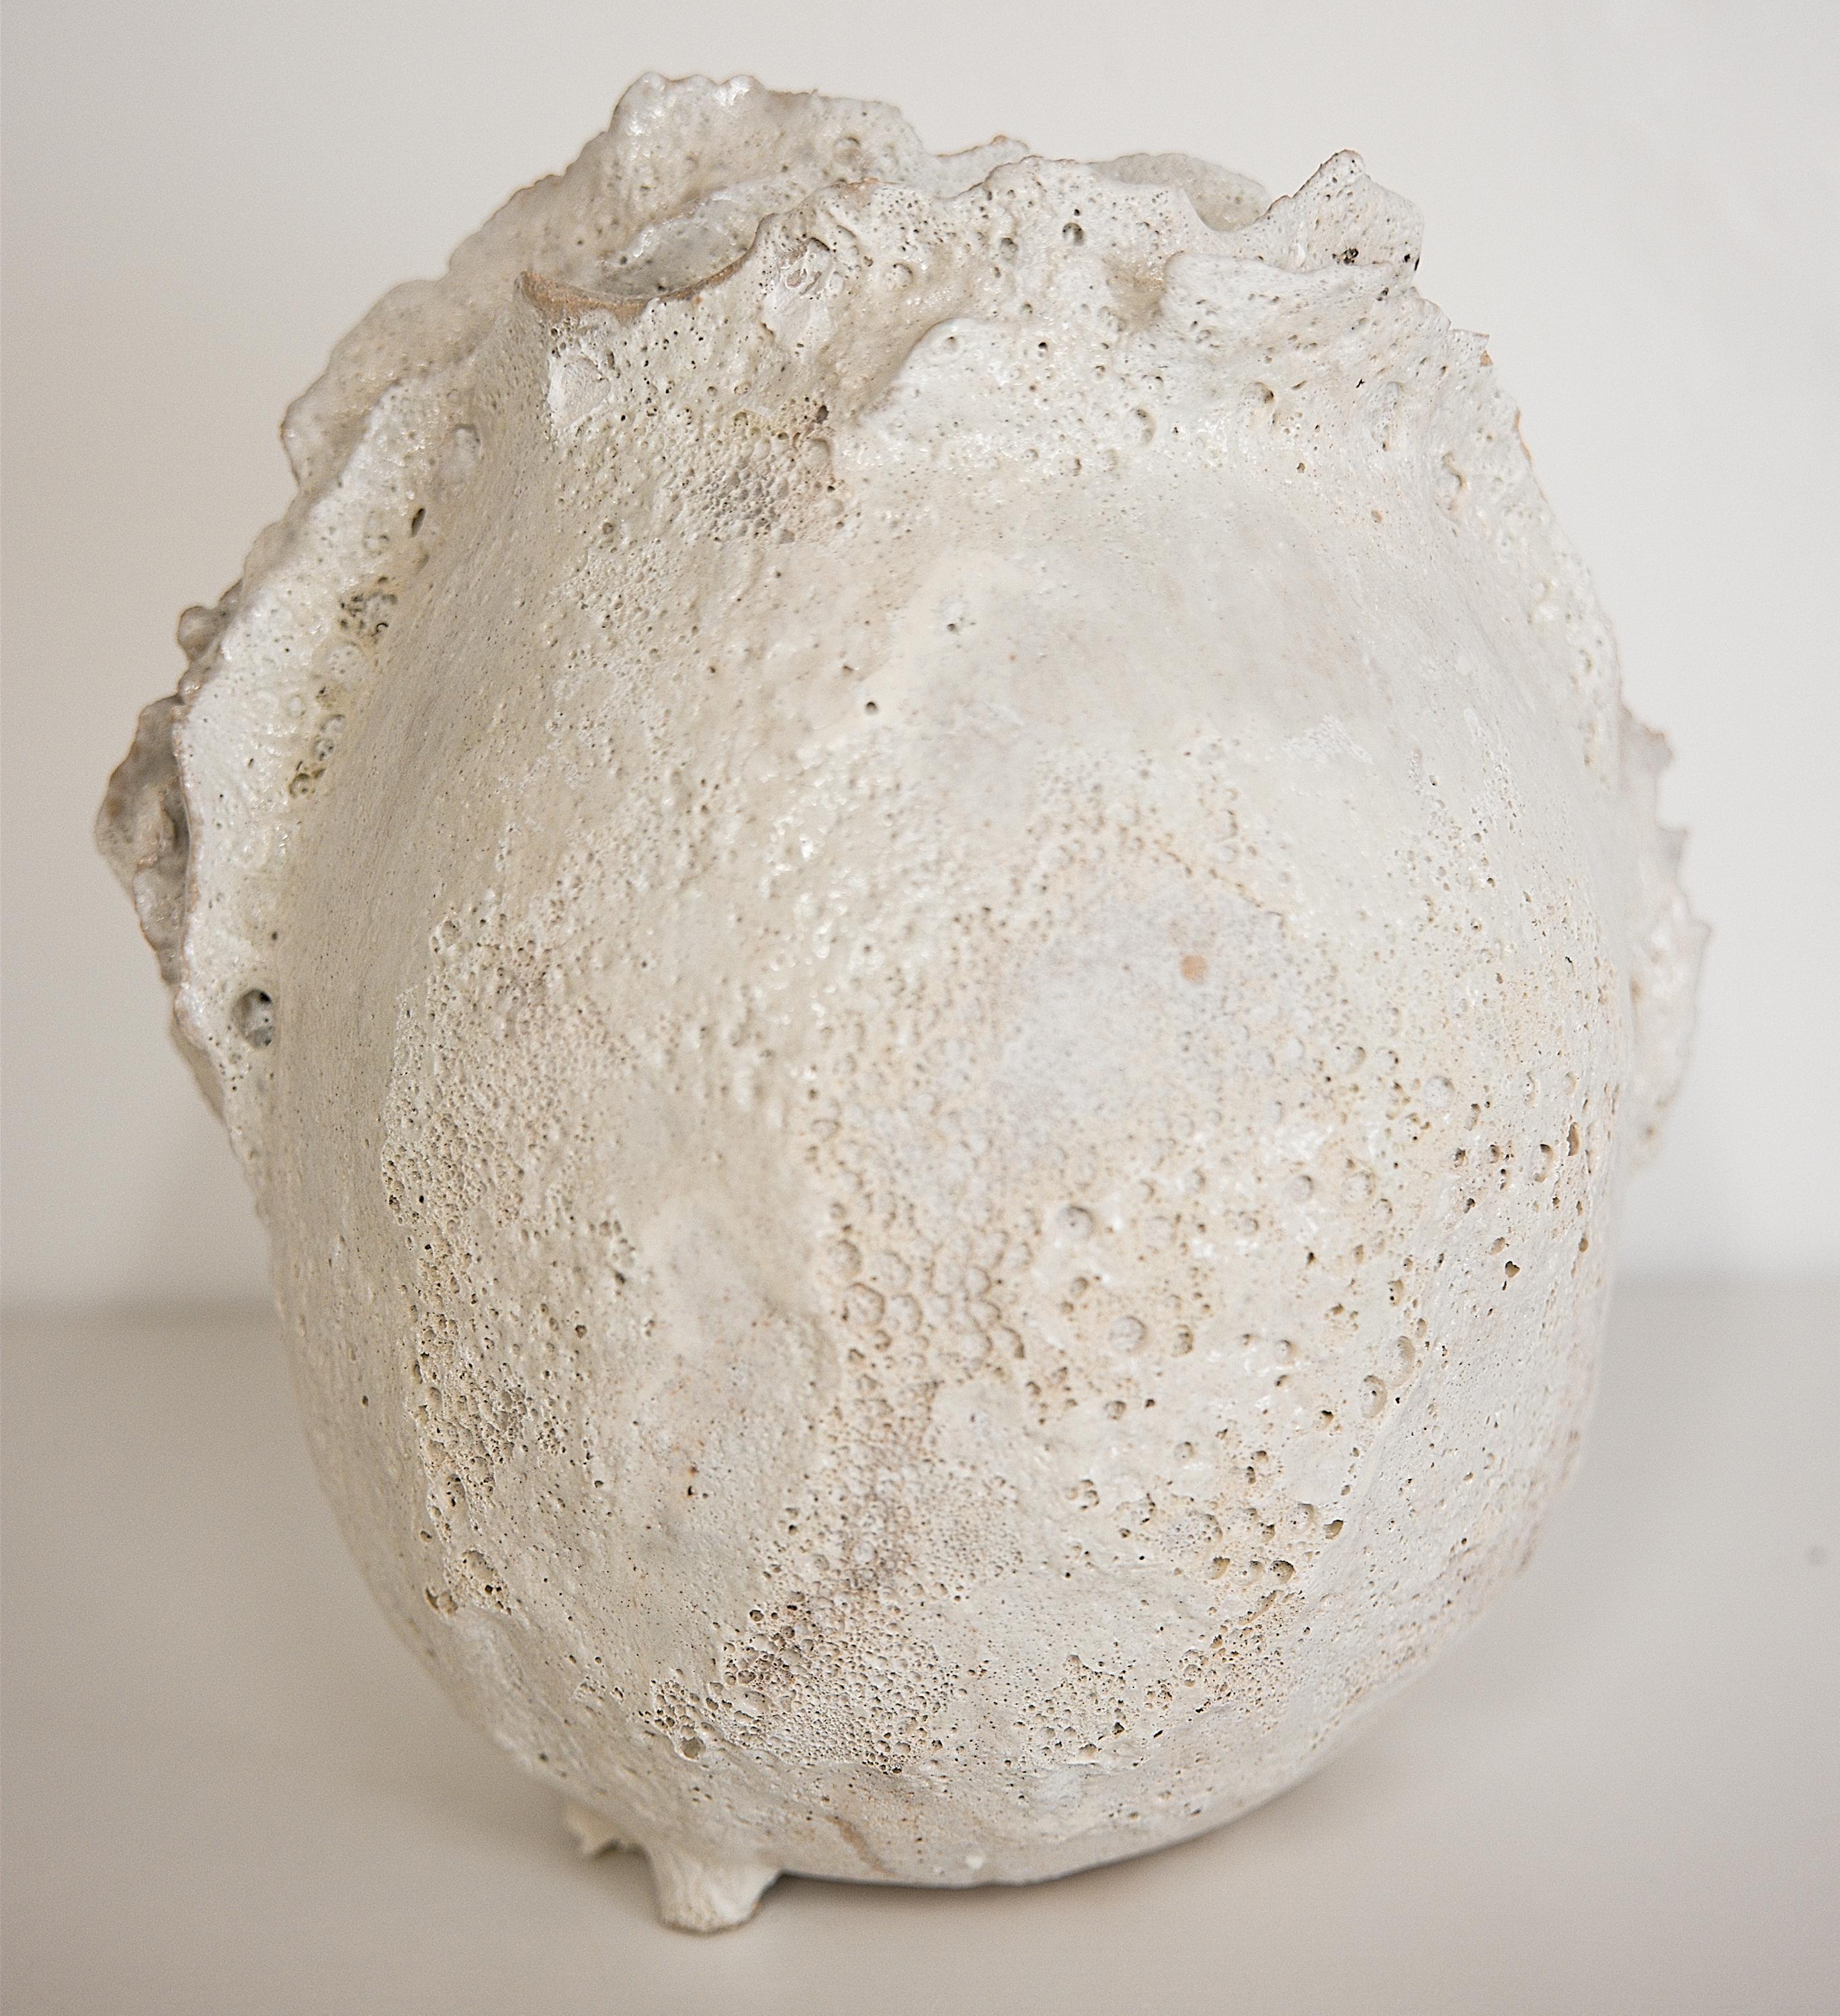 Bring a touch of modern style to your home with our Drift Torn Edge Vases
one of kind 
this White moon jar with Textured drips and lava glaze
one of a kind

., each striking vase features a unique, moon-like design in an eye-catching light lava